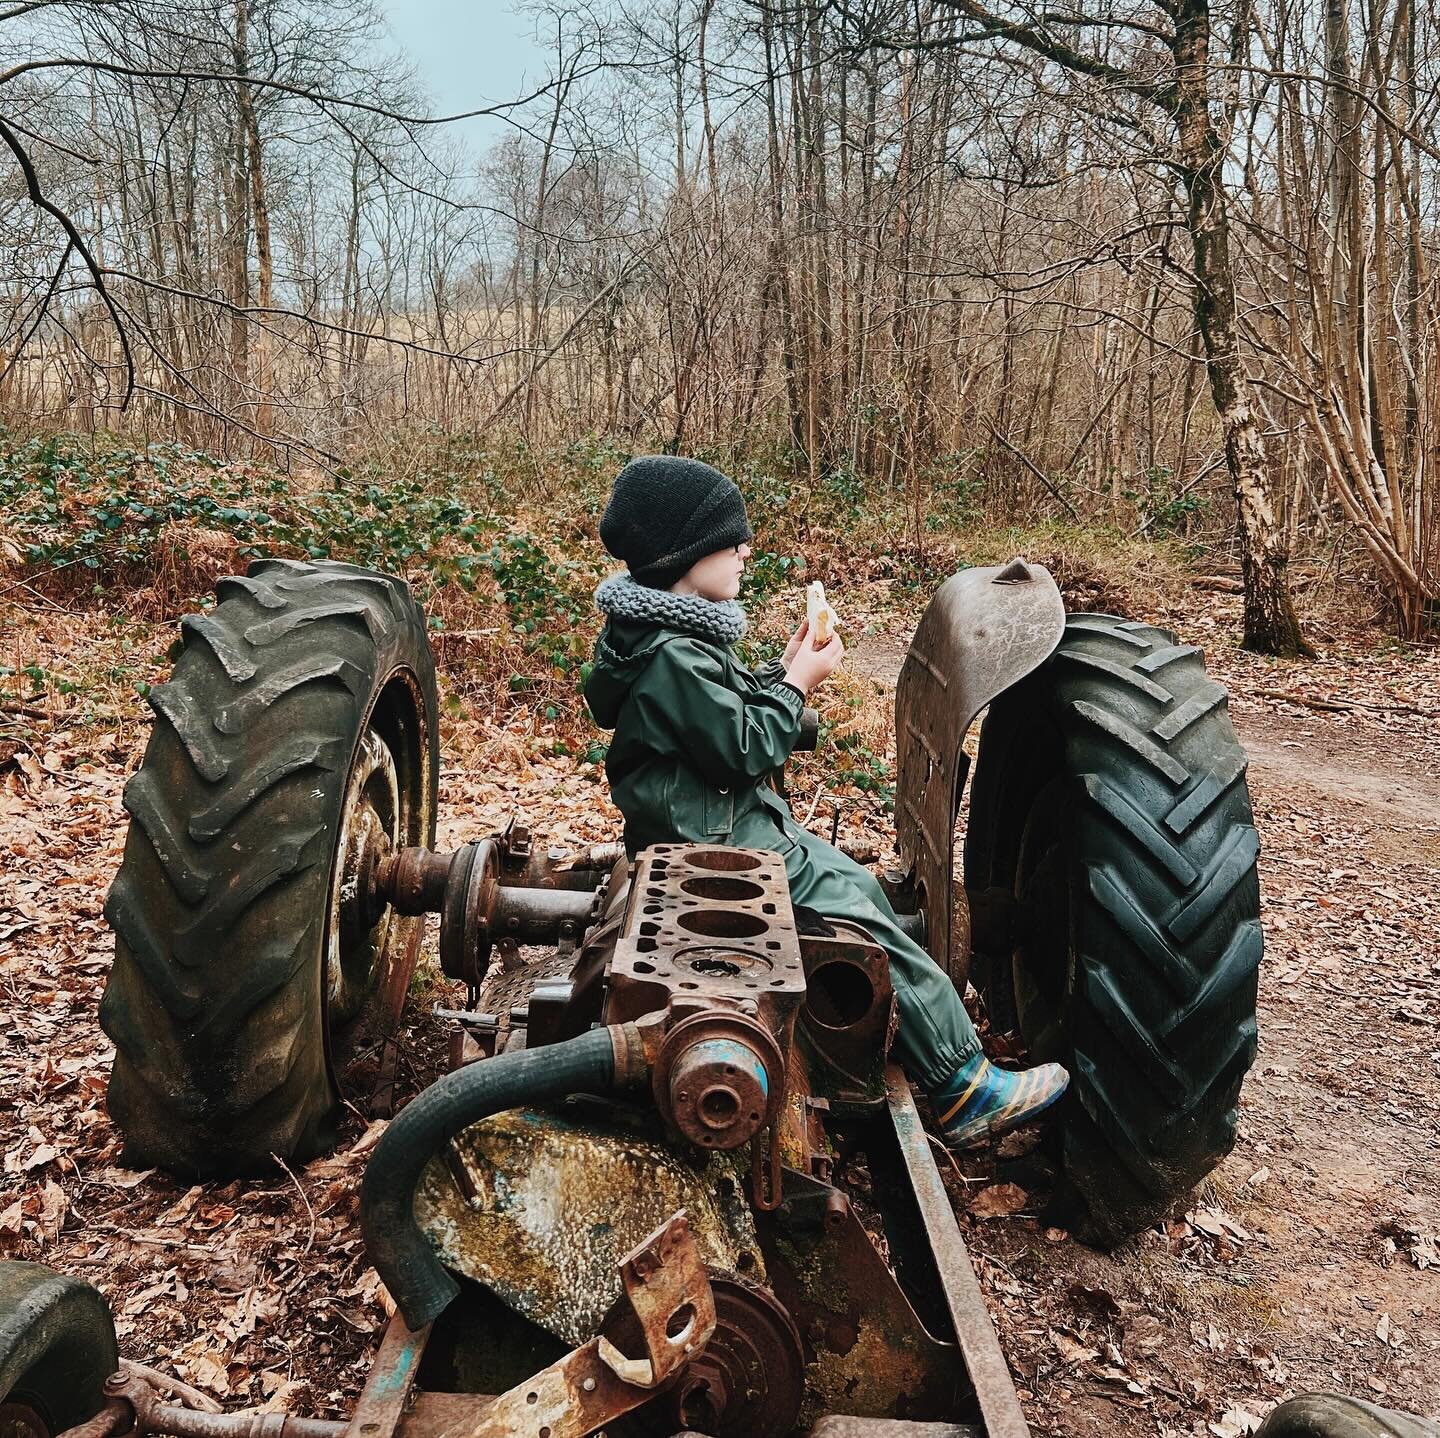 Seems monthly roundups are a thing. So here&rsquo;s my January.
1. The troll in the woods, having his sandwich on his favourite rusty tractor.
2. &ldquo;Do I really have to come downstairs to bed&rdquo;
3. BMTH from the worst seats ever at the O2.
4.